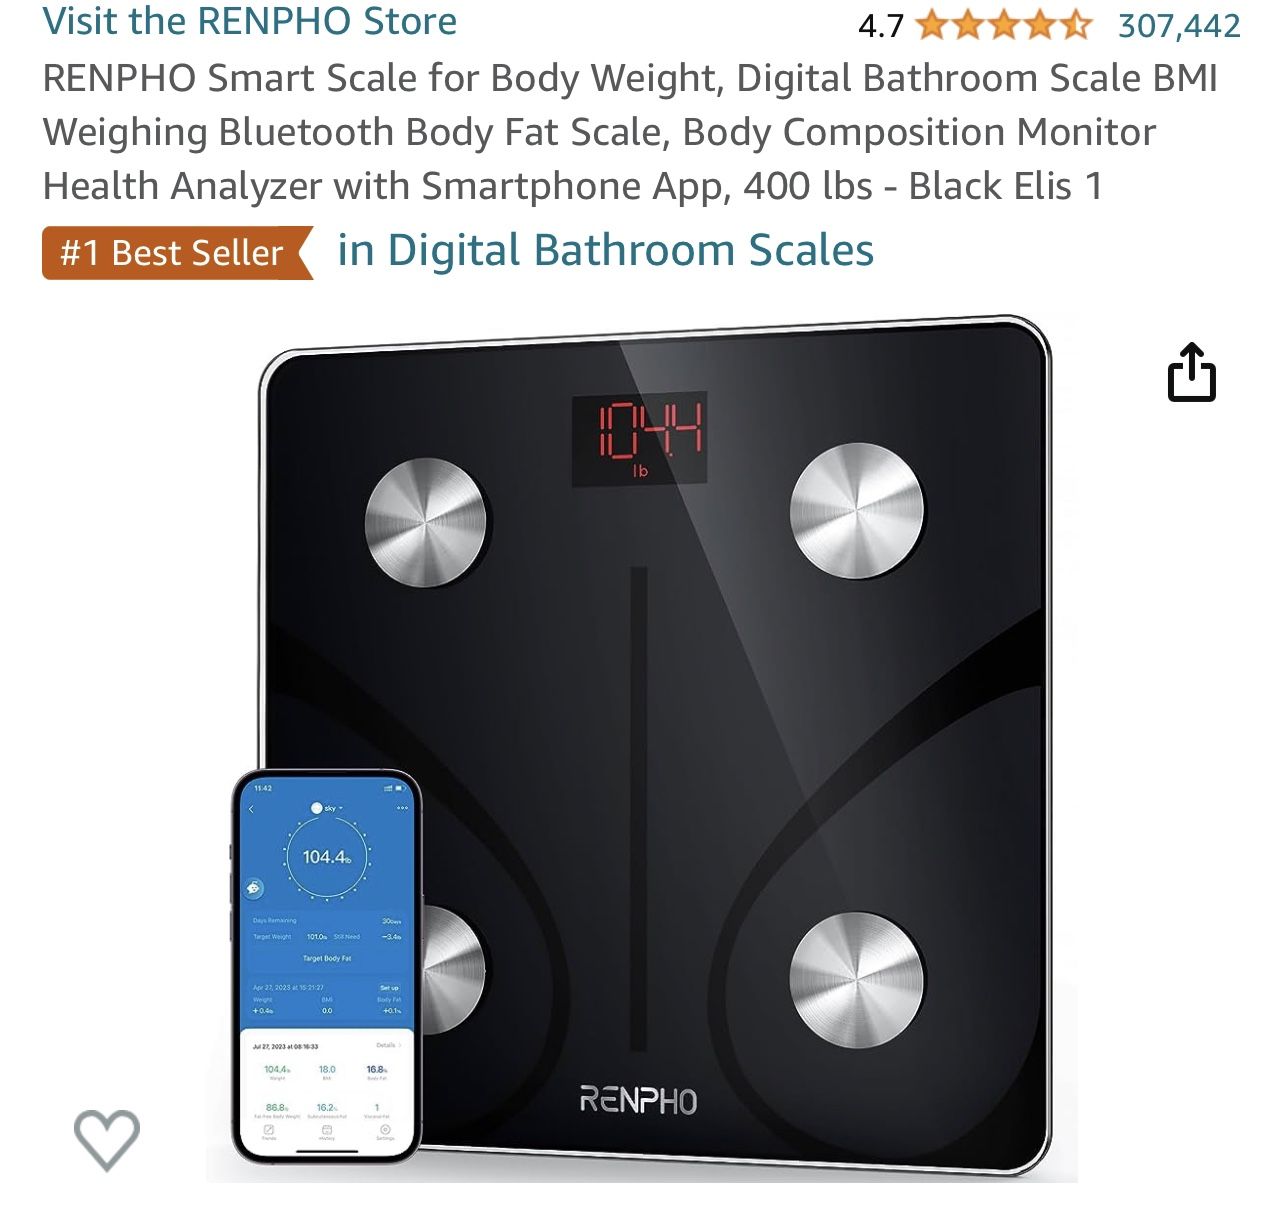 RENPHO Smart Scale for Body Weight, Digital Bathroom Scale BMI Weighing Bluetooth Body Fat Scale, Body Composition Monitor Health Analyzer with Smartp